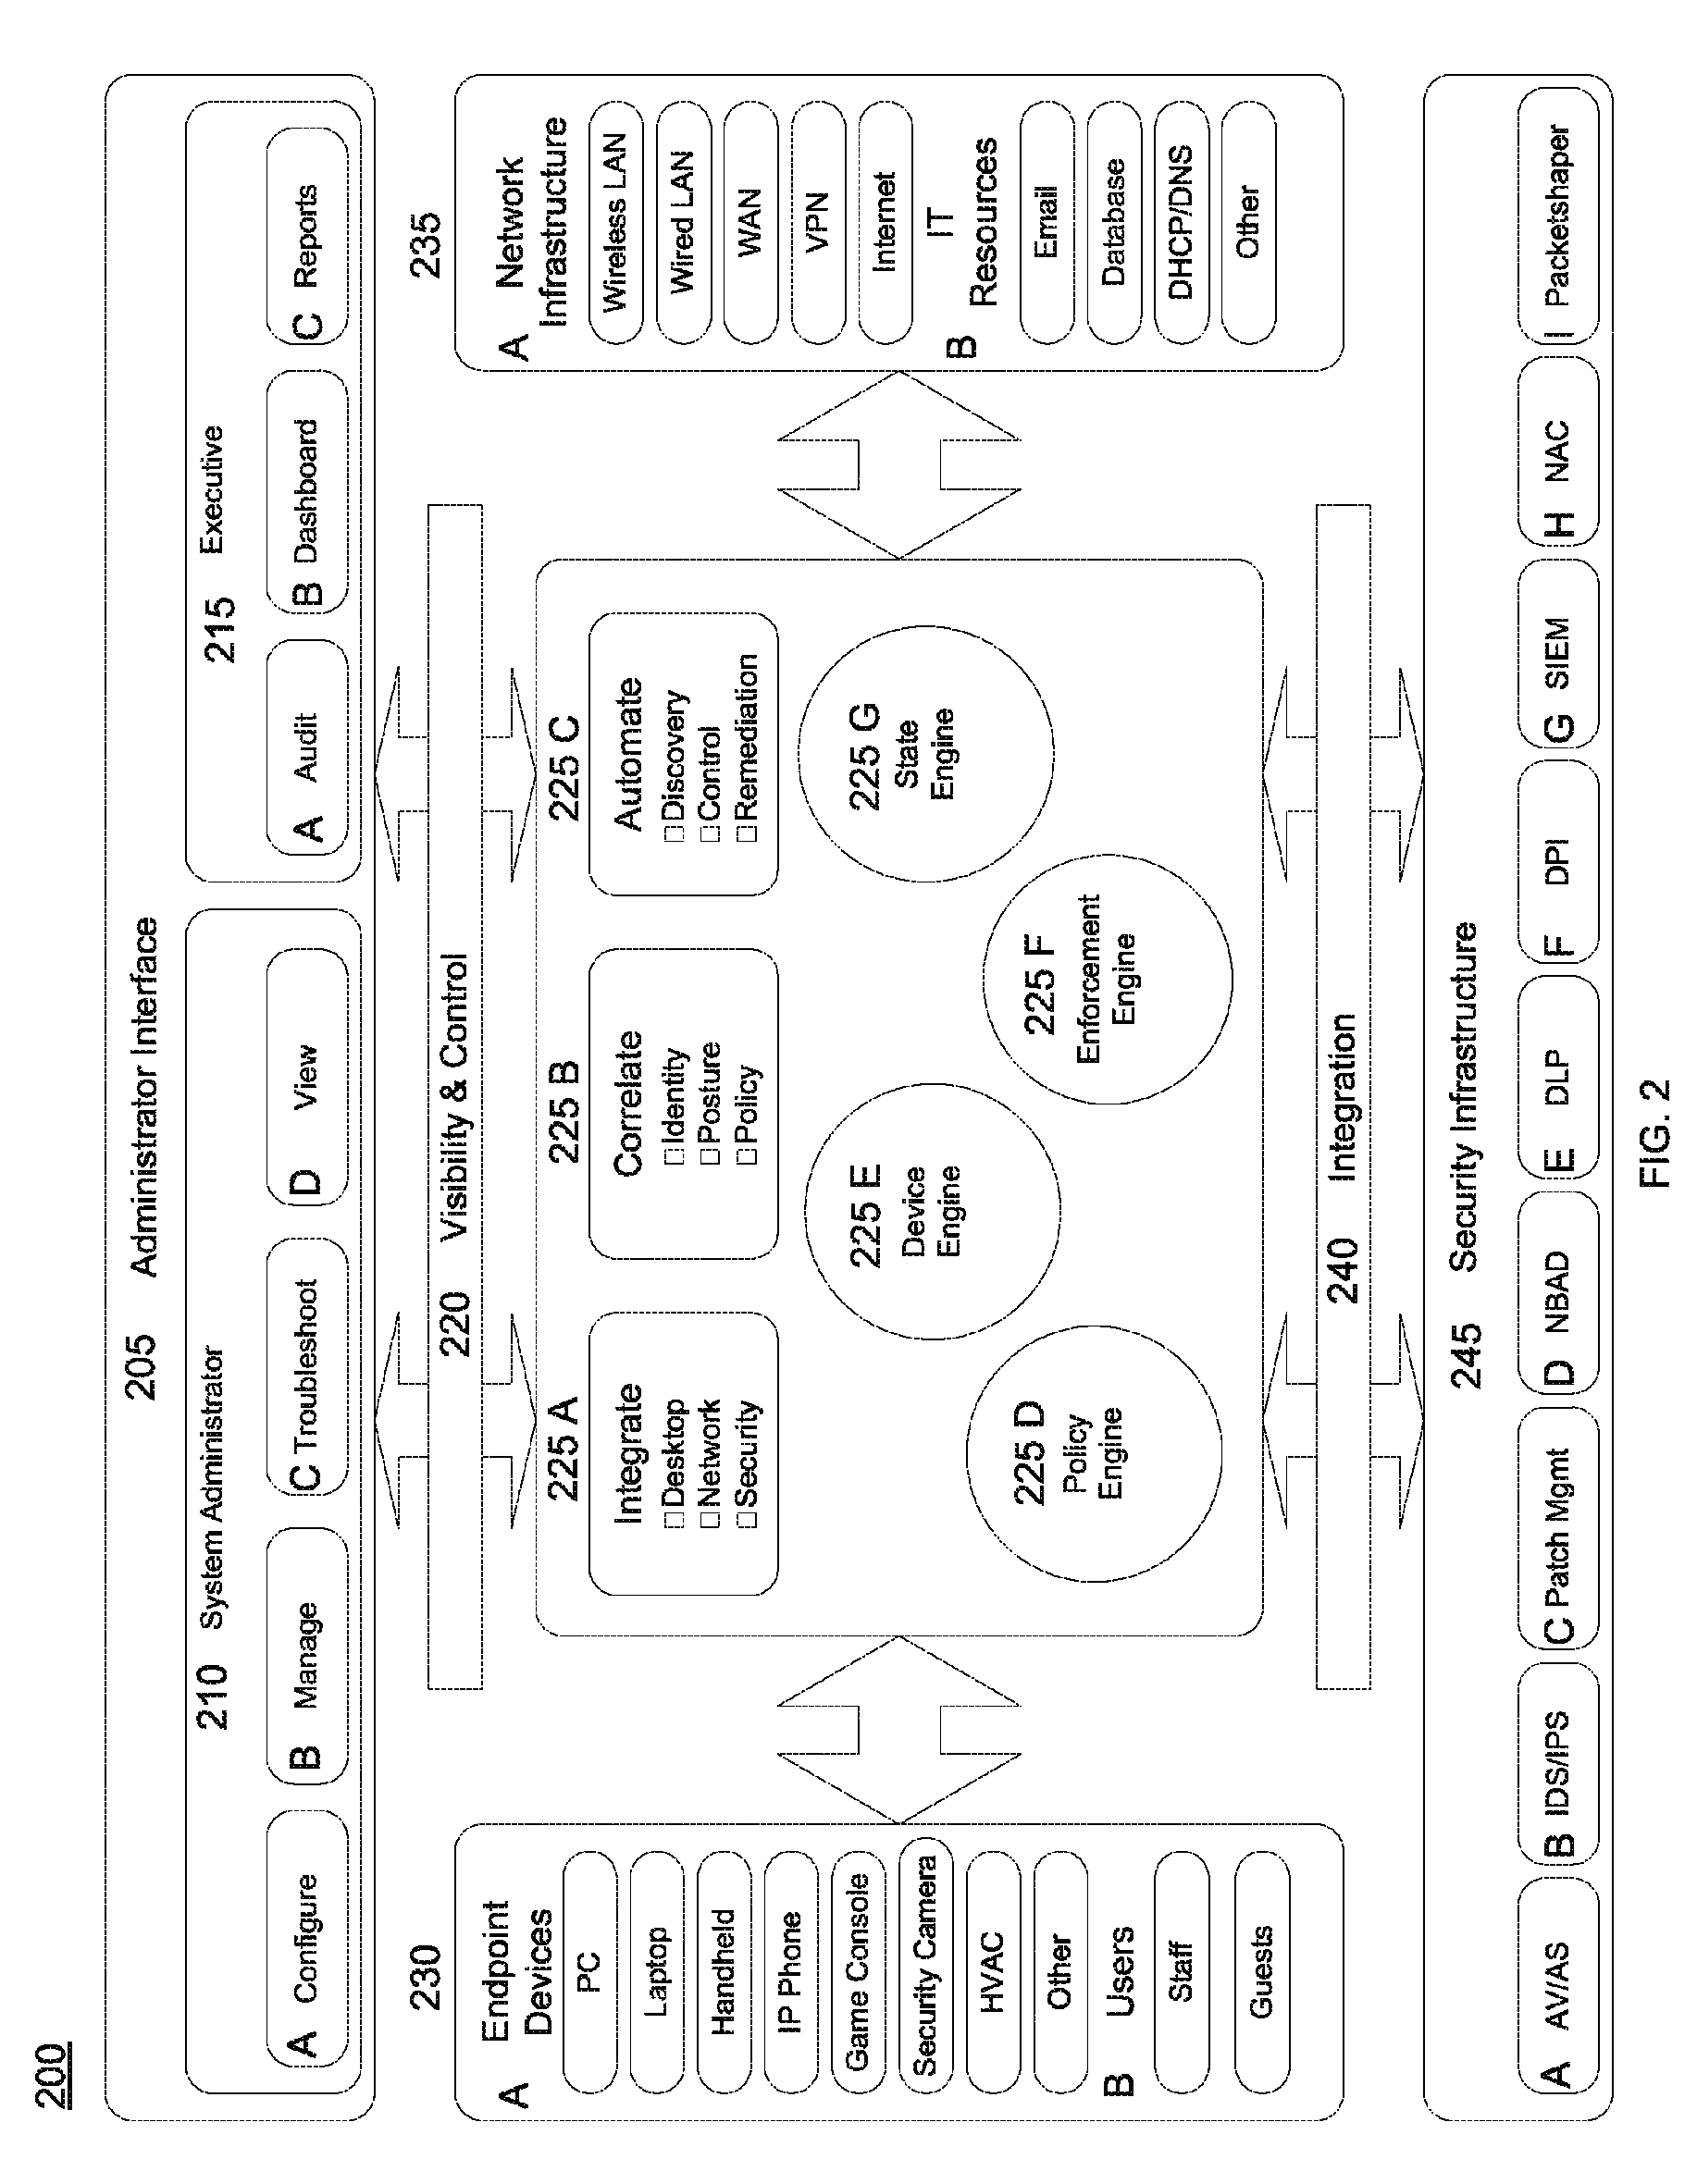 Automated configuration of network devices administered by policy enforcement